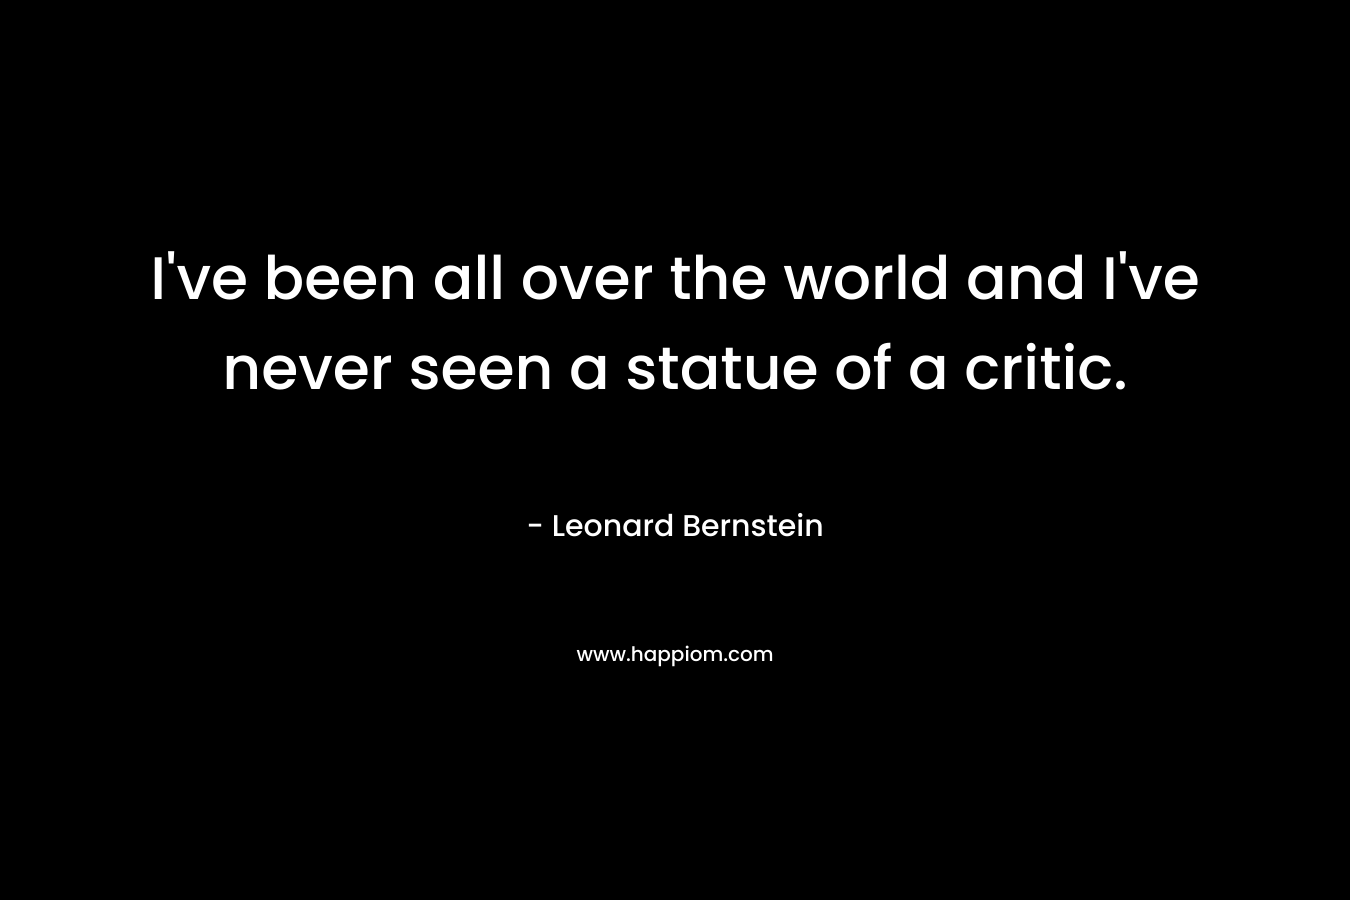 I’ve been all over the world and I’ve never seen a statue of a critic. – Leonard Bernstein